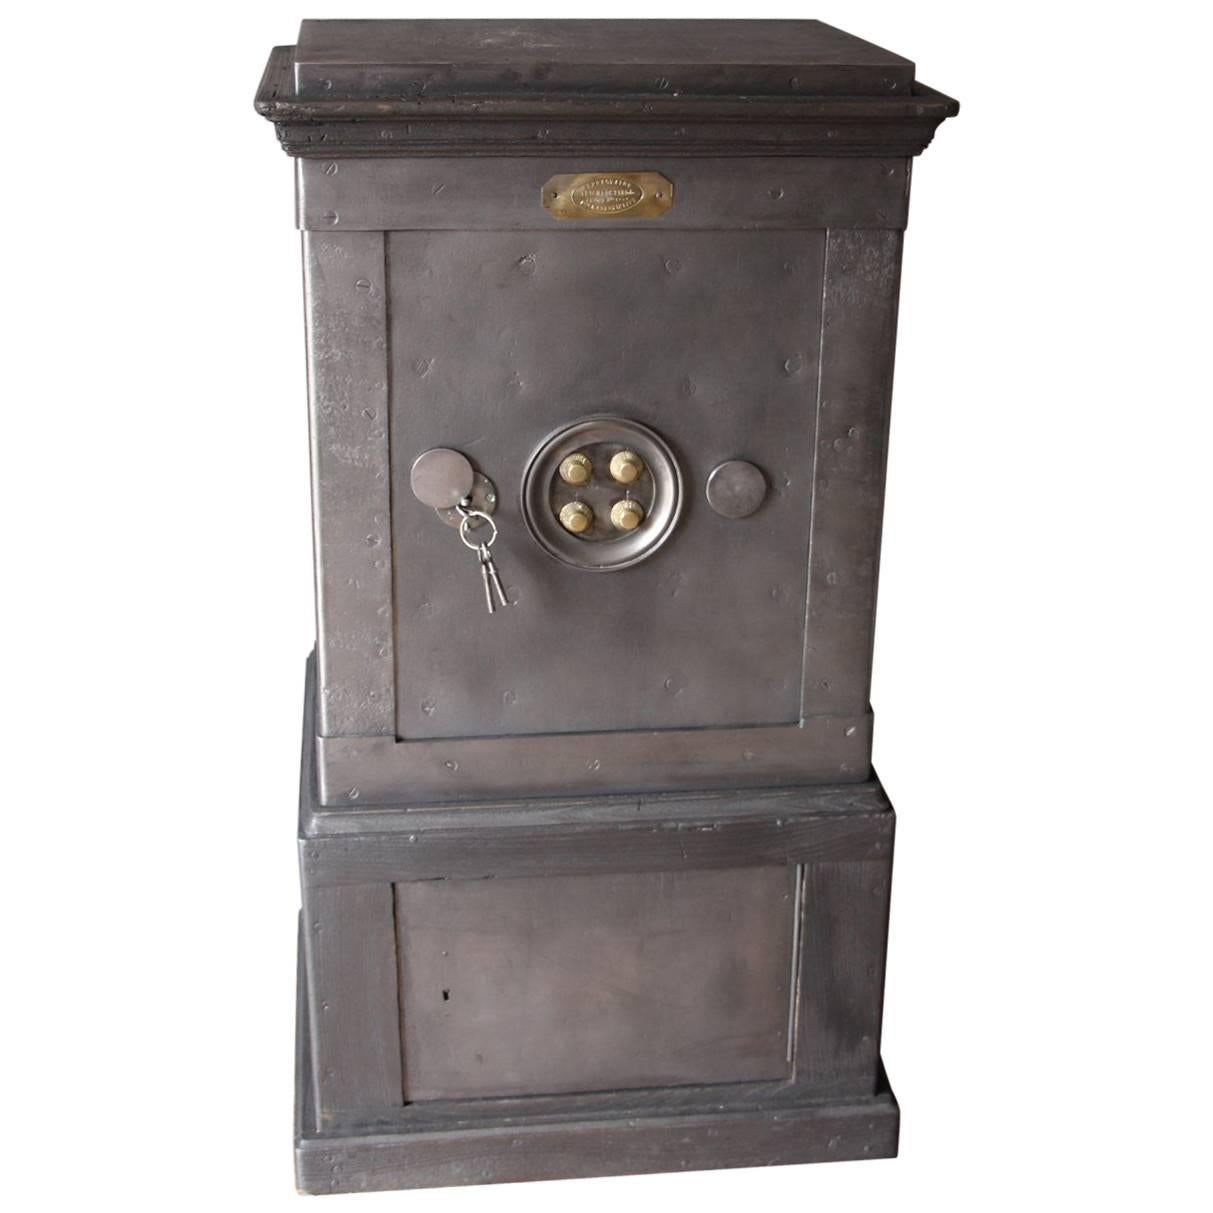 Black Steel, Iron and Wood Safe with All Keys and Working Combination by Bauche